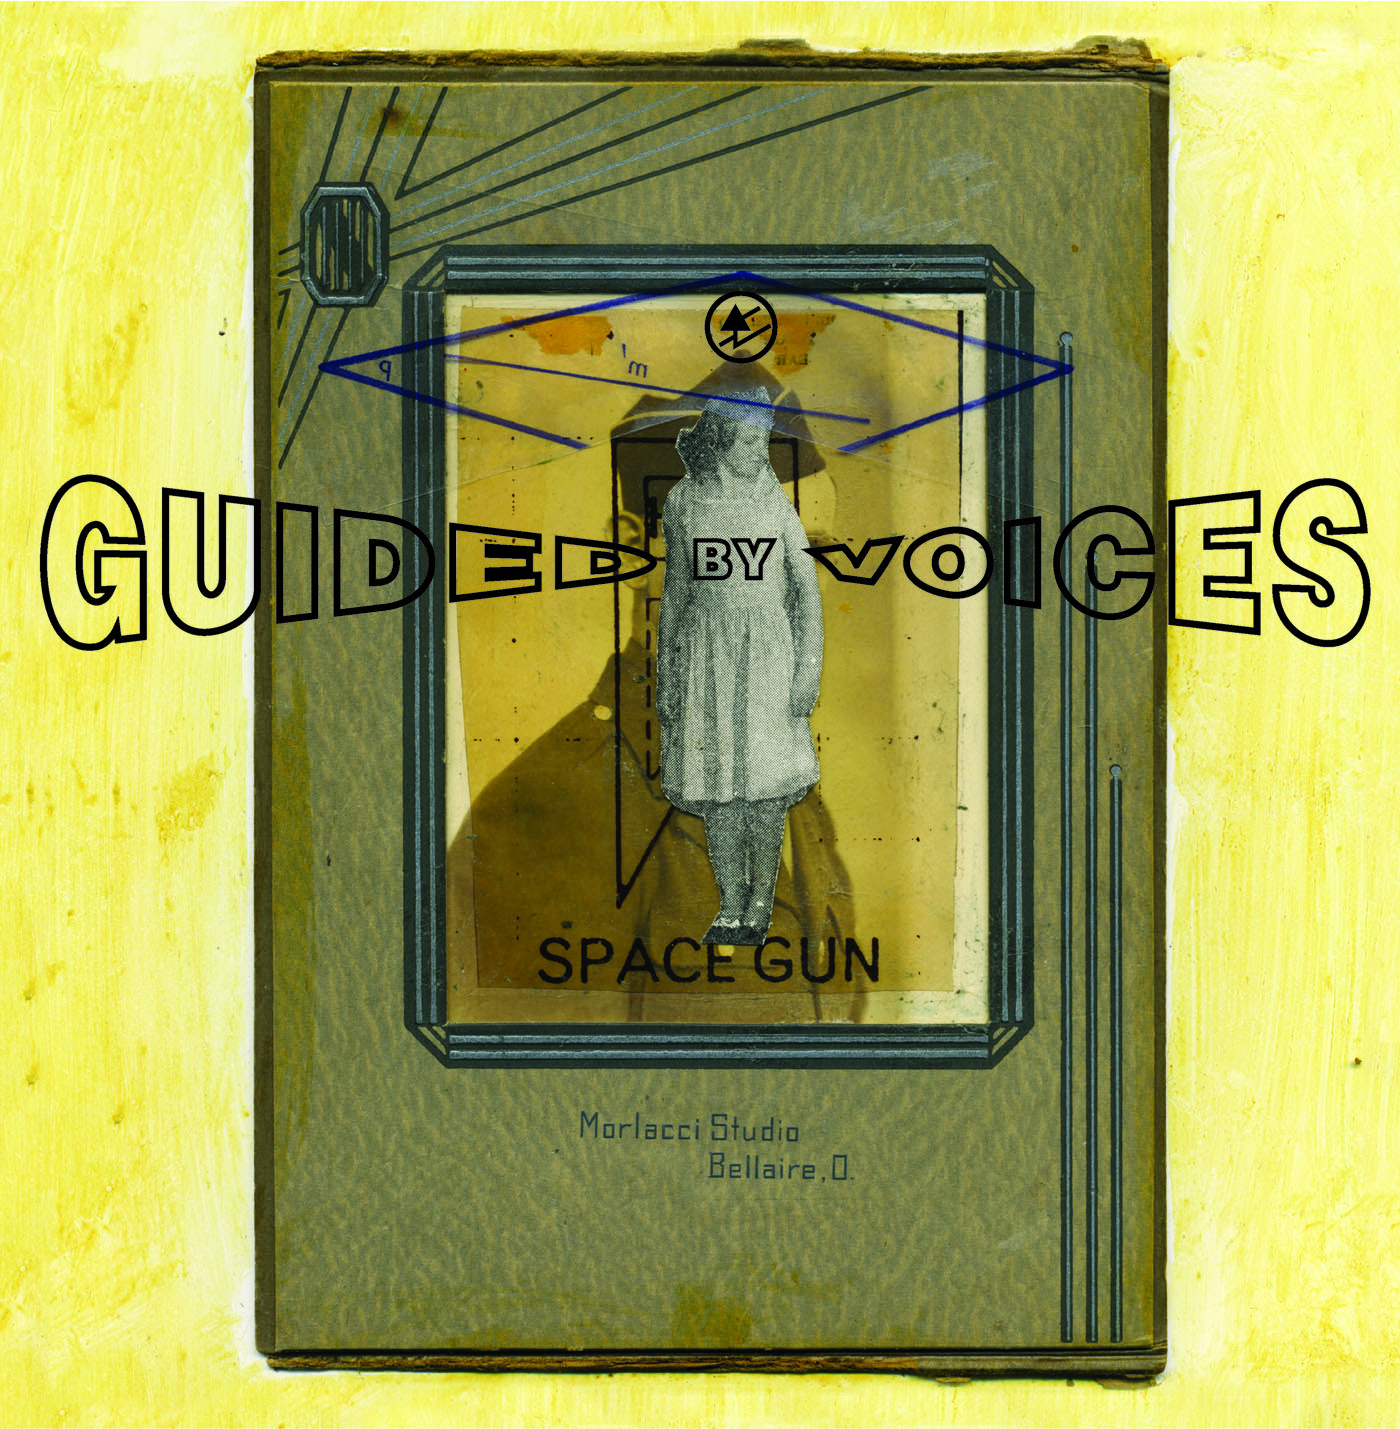 Guided By Voices Announce New Album <i></noscript>Space Gun</i>, Share Title Track” title=”Print” data-original-id=”269480″ data-adjusted-id=”269480″ class=”sm_size_full_width sm_alignment_center ” data-image-source=”getty” />
<p><strong><i>Space Gun</i> Tracklist:</strong><br />
01. Space Gun<br />
02. Colonel Paper<br />
03. King Flute<br />
04. Ark Technican<br />
05. See My Field<br />
06. Liar’s Box<br />
07. Blink Bank<br />
08. Daily Get Ups<br />
09. Hudson Rake<br />
10. Sport Component National<br />
11. I Love Kangaroos<br />
12. Grey Spat Matters<br />
13. That’s Good<br />
14. Flight Advantage<br />
15. Evolution Circus</p>
</p> </div>
</div>
</div>
</div>
</div>
</div>
</div>
</section>
<section data-particle_enable=